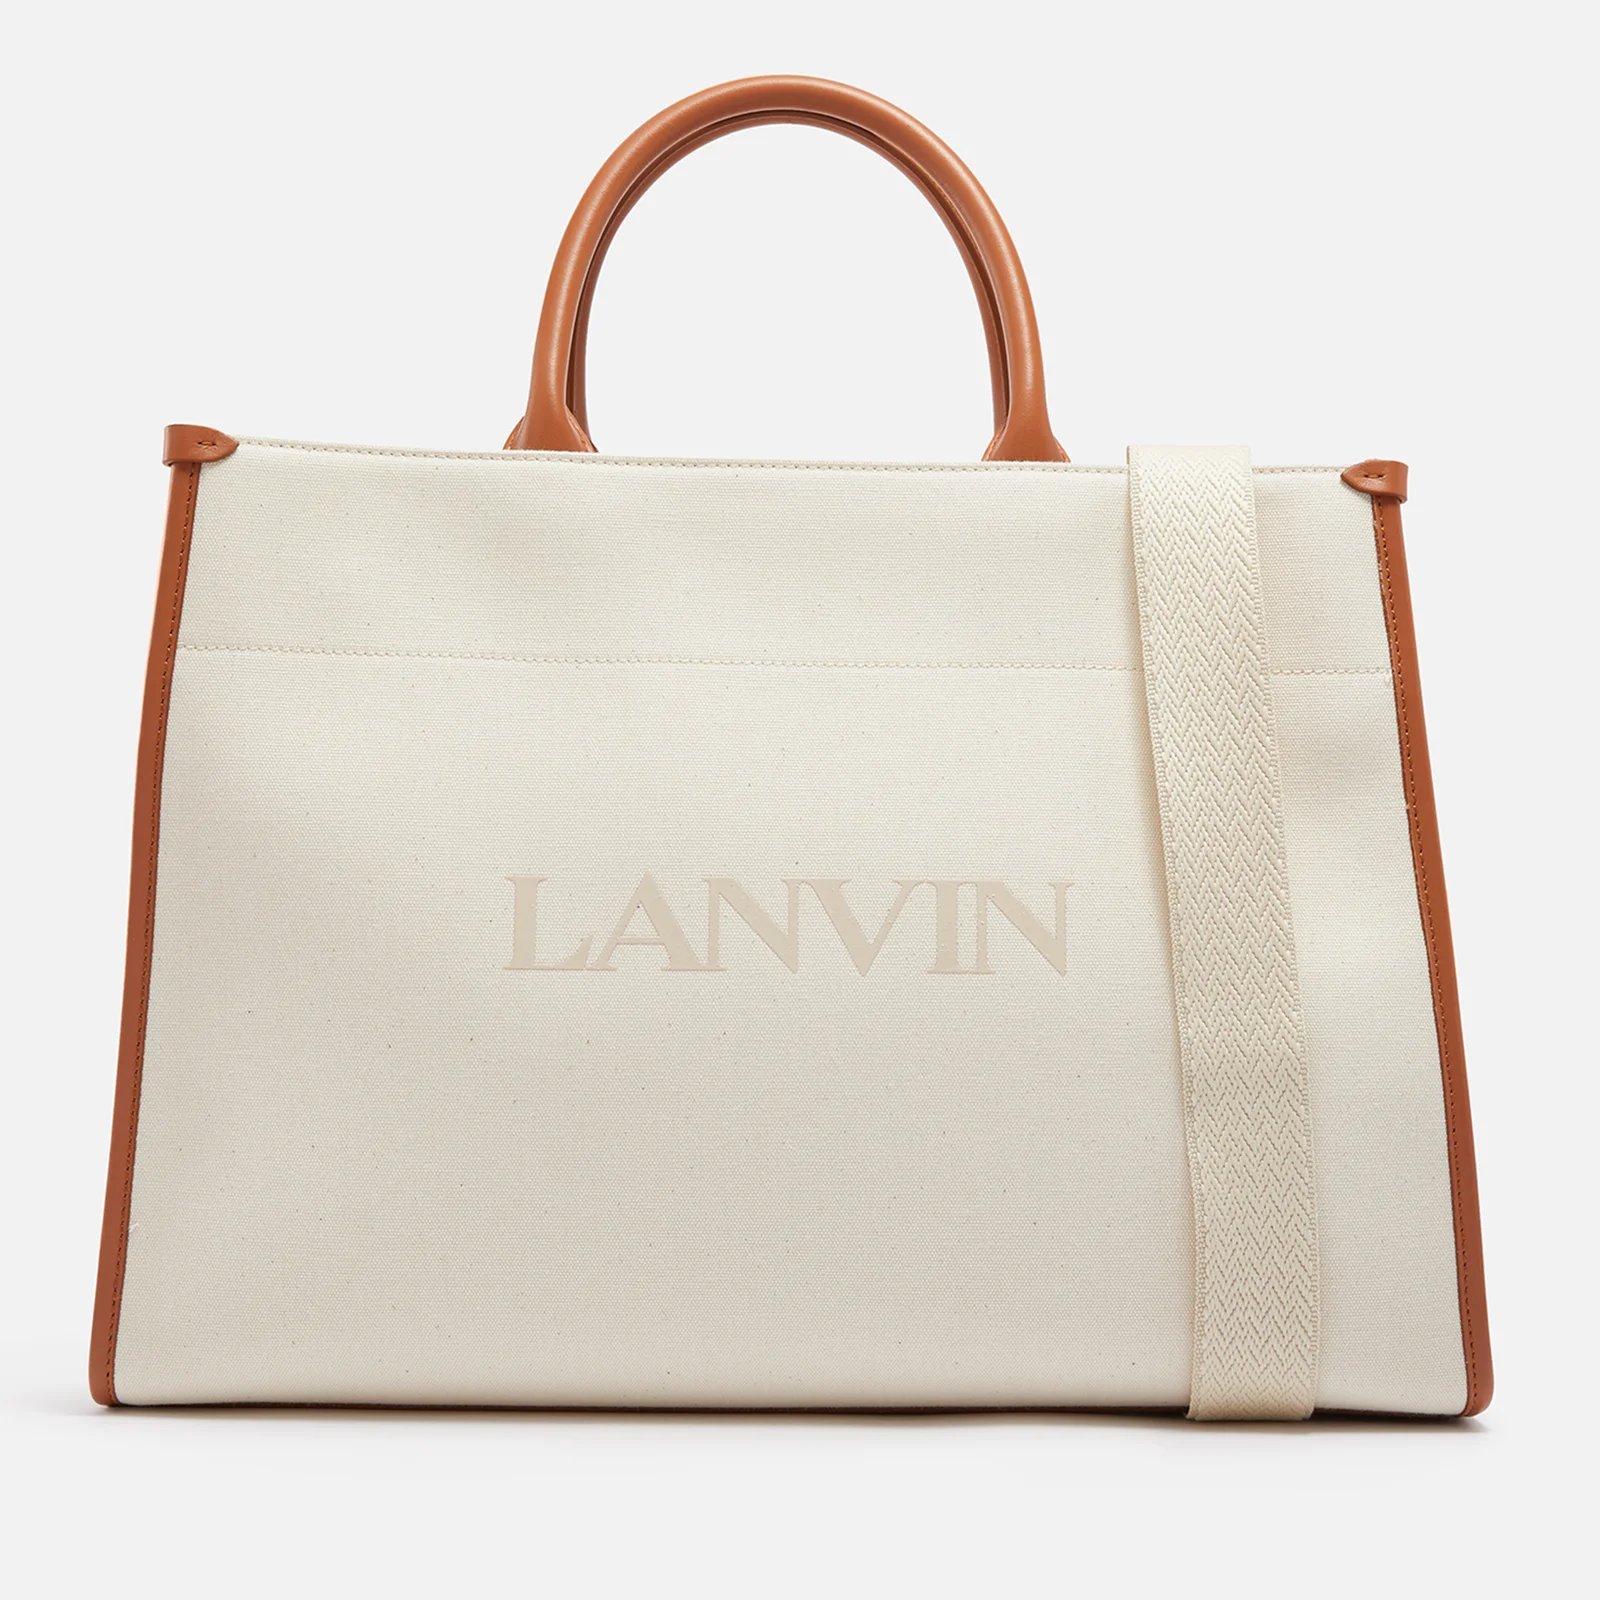 Lanvin Canvas and Leather Tote Bag Image 1